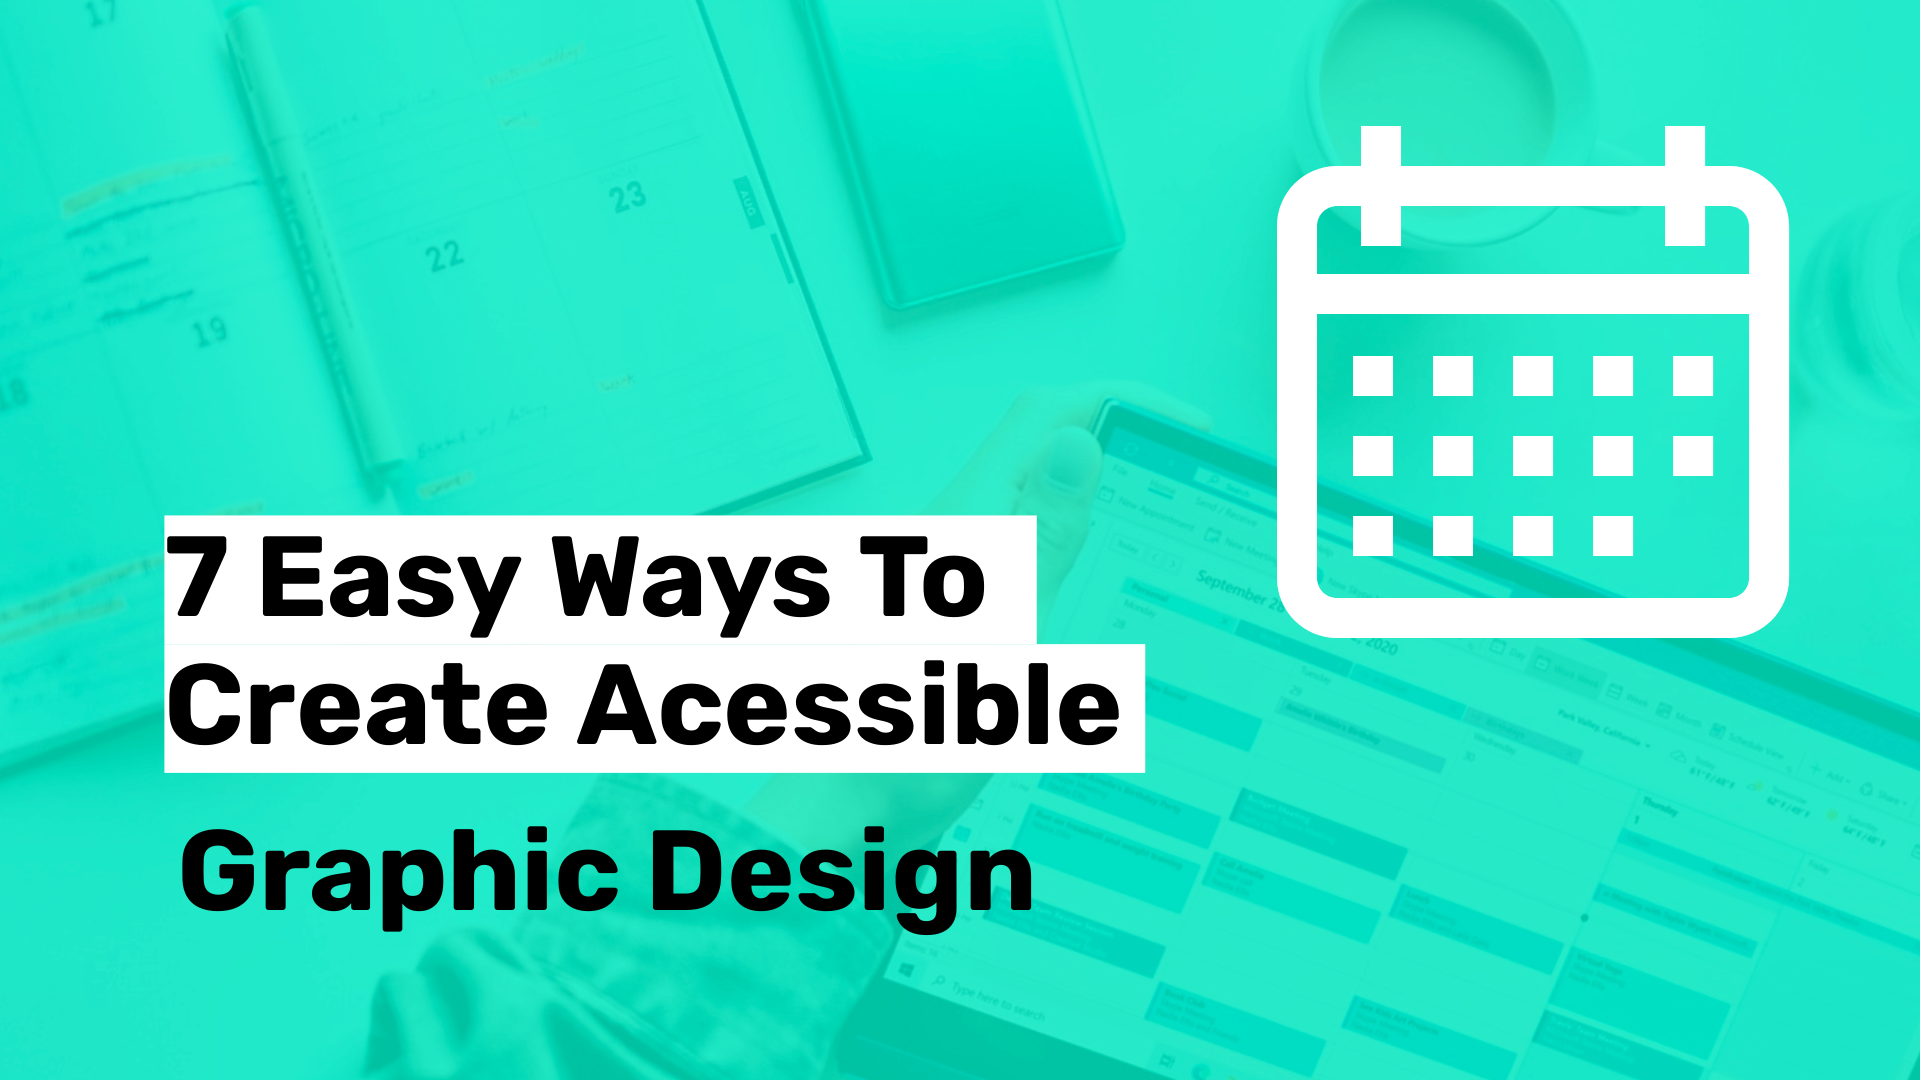 7 Easy Ways to Create Accessible Graphic Design